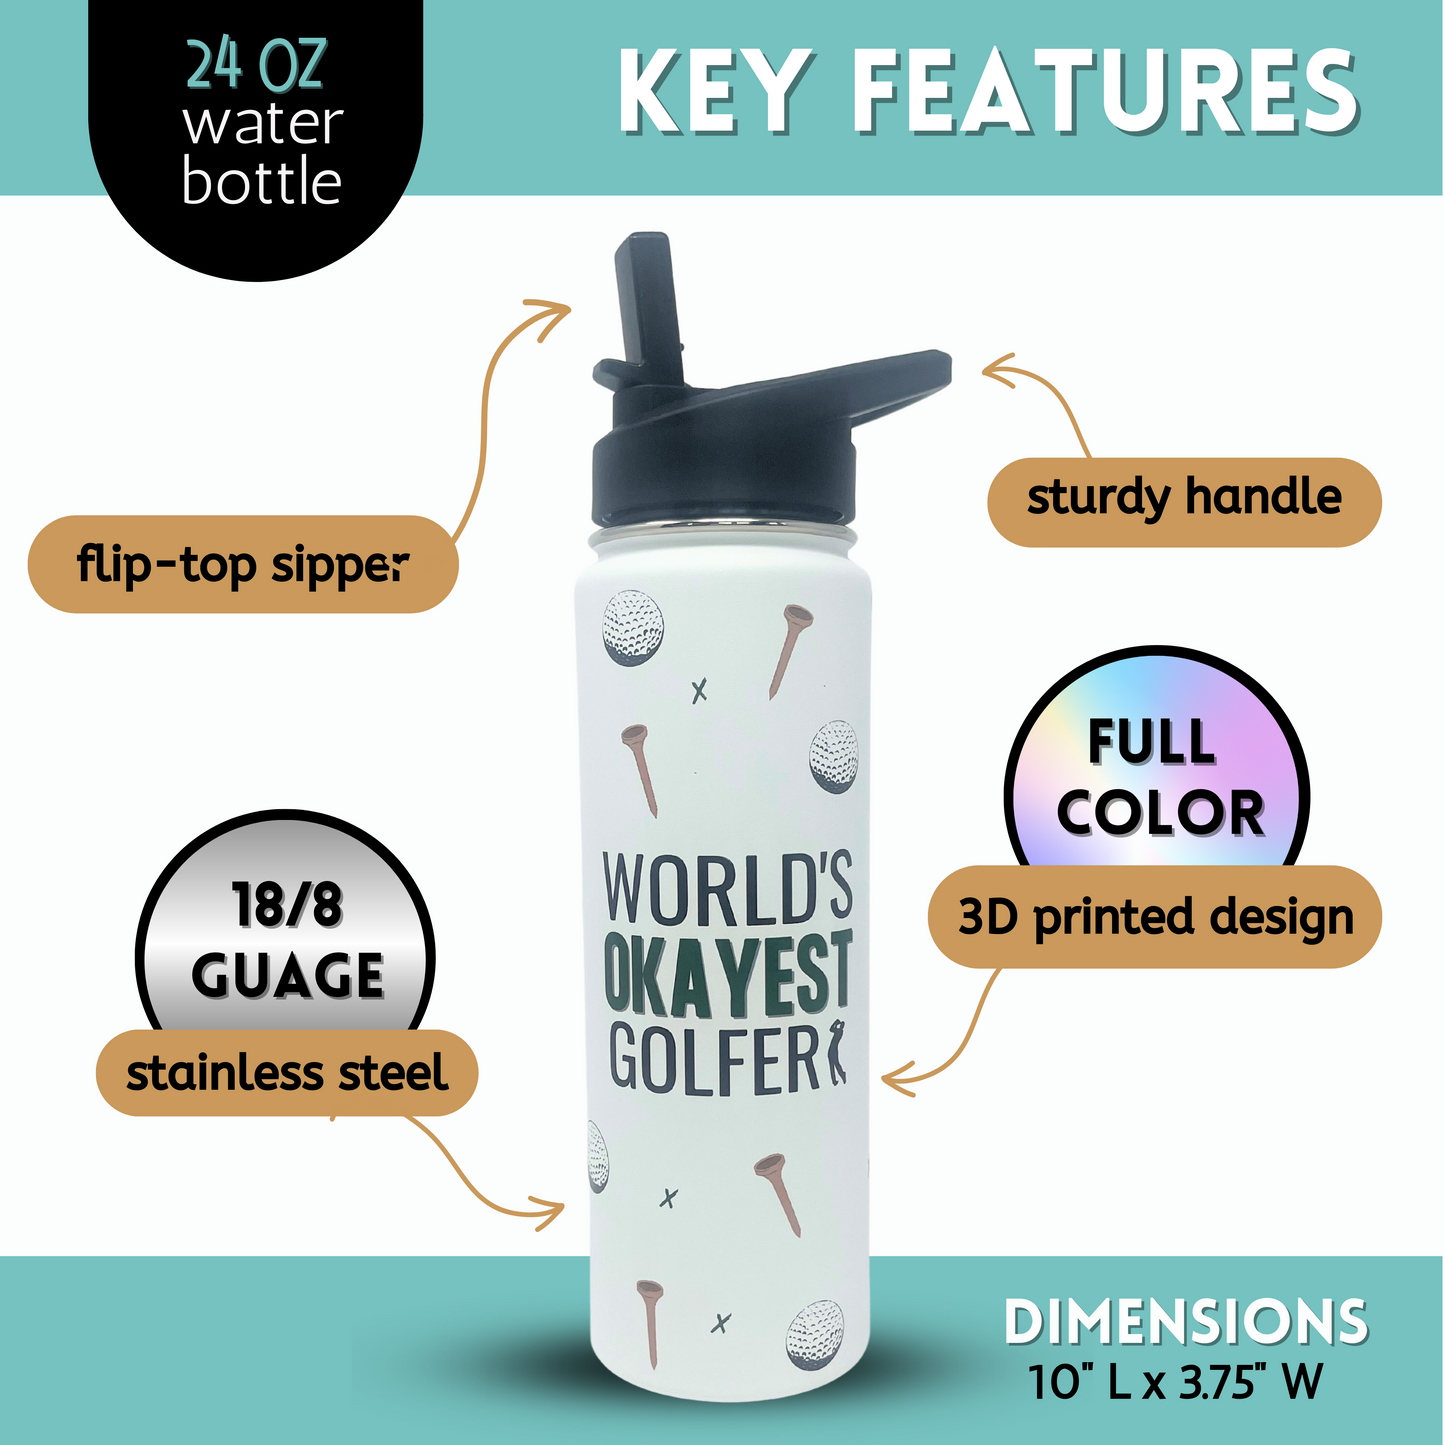 Personalized Golf Gifts for Men with Coffee Tumbler - Home Wet Bar